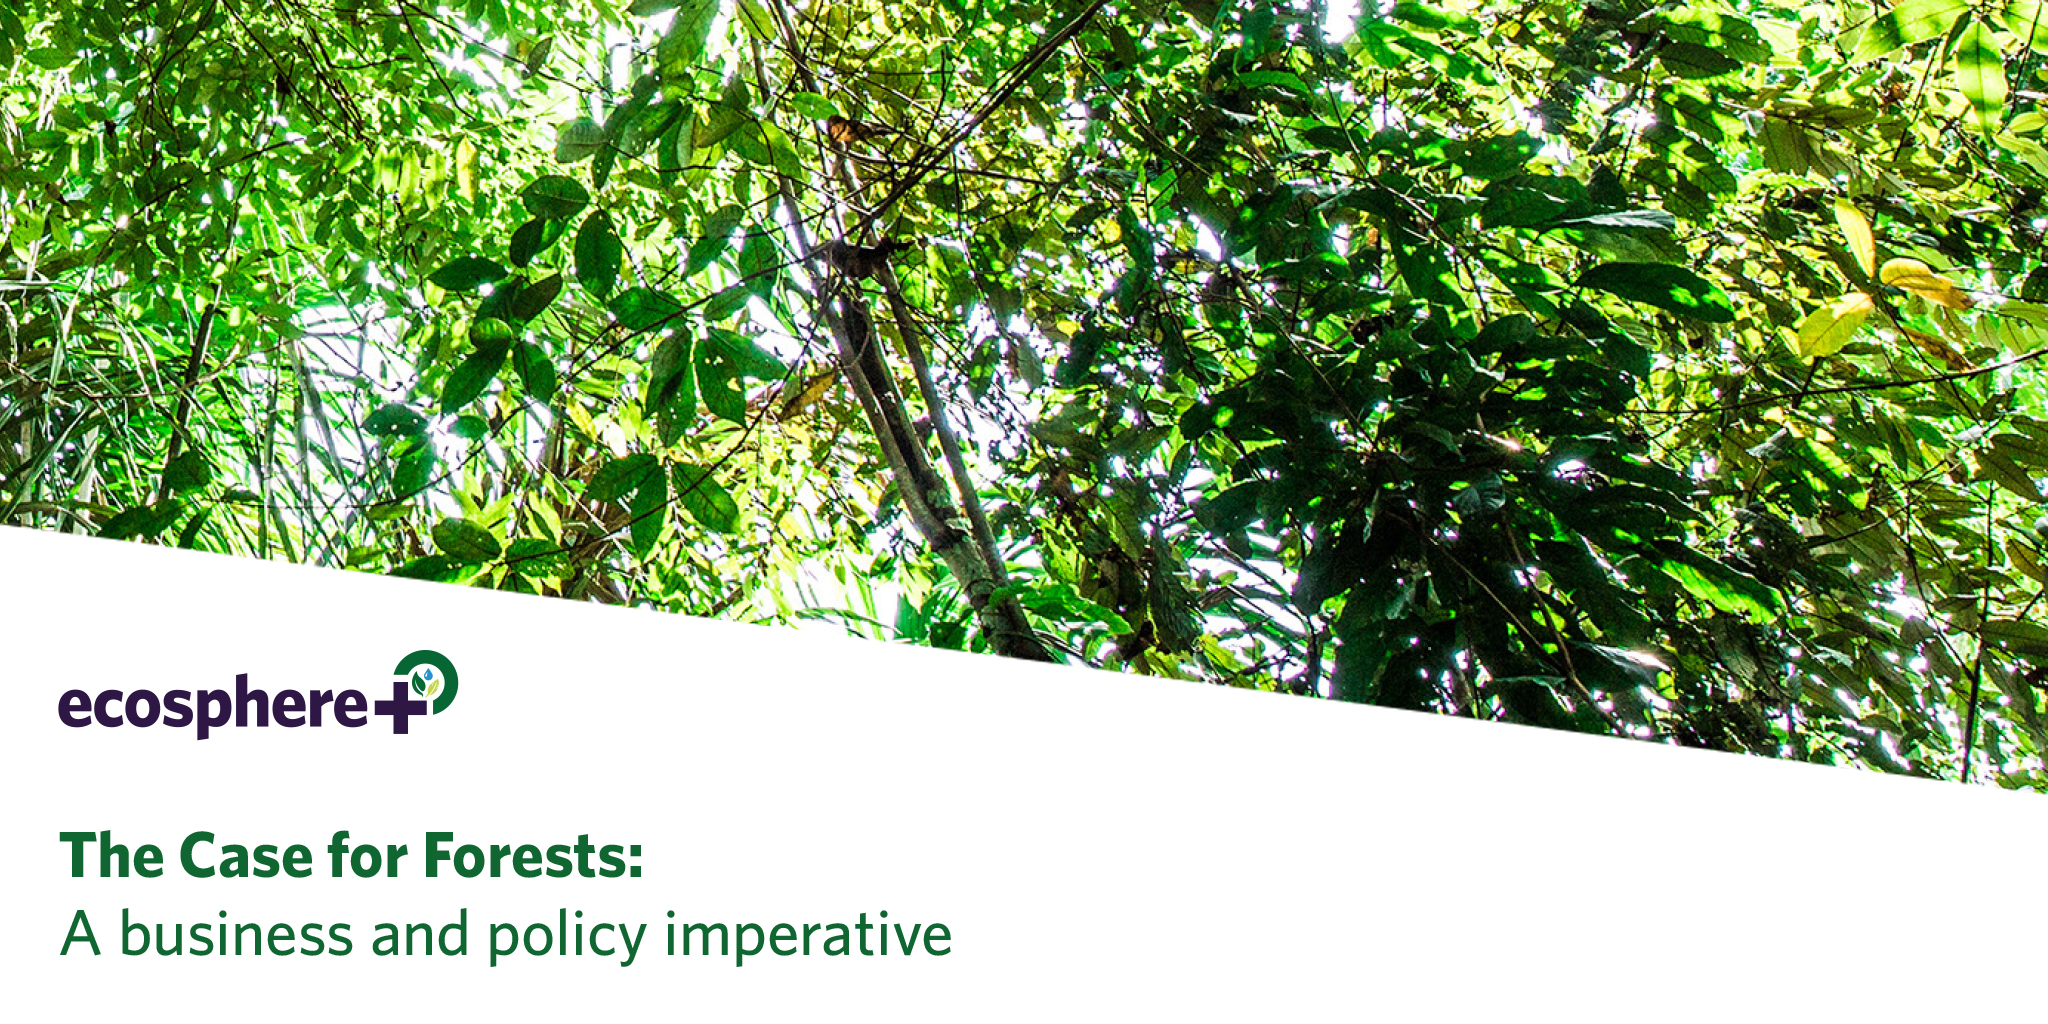 The Case for Forests: A business and policy imperative